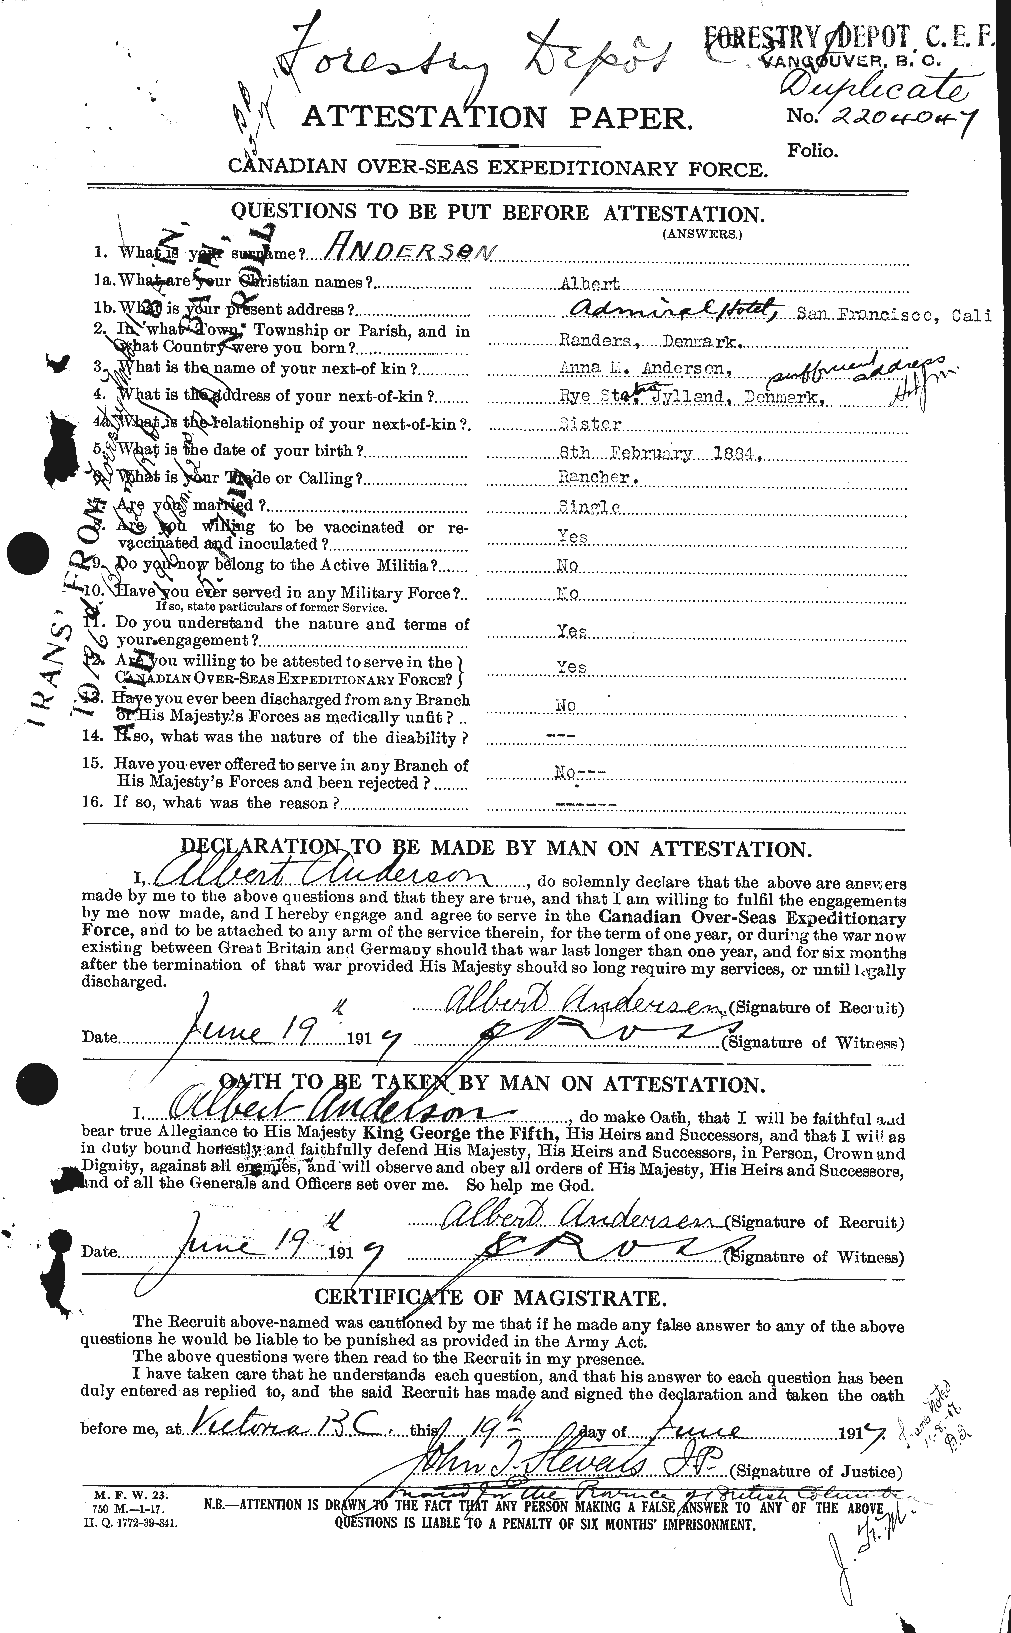 Personnel Records of the First World War - CEF 209553a